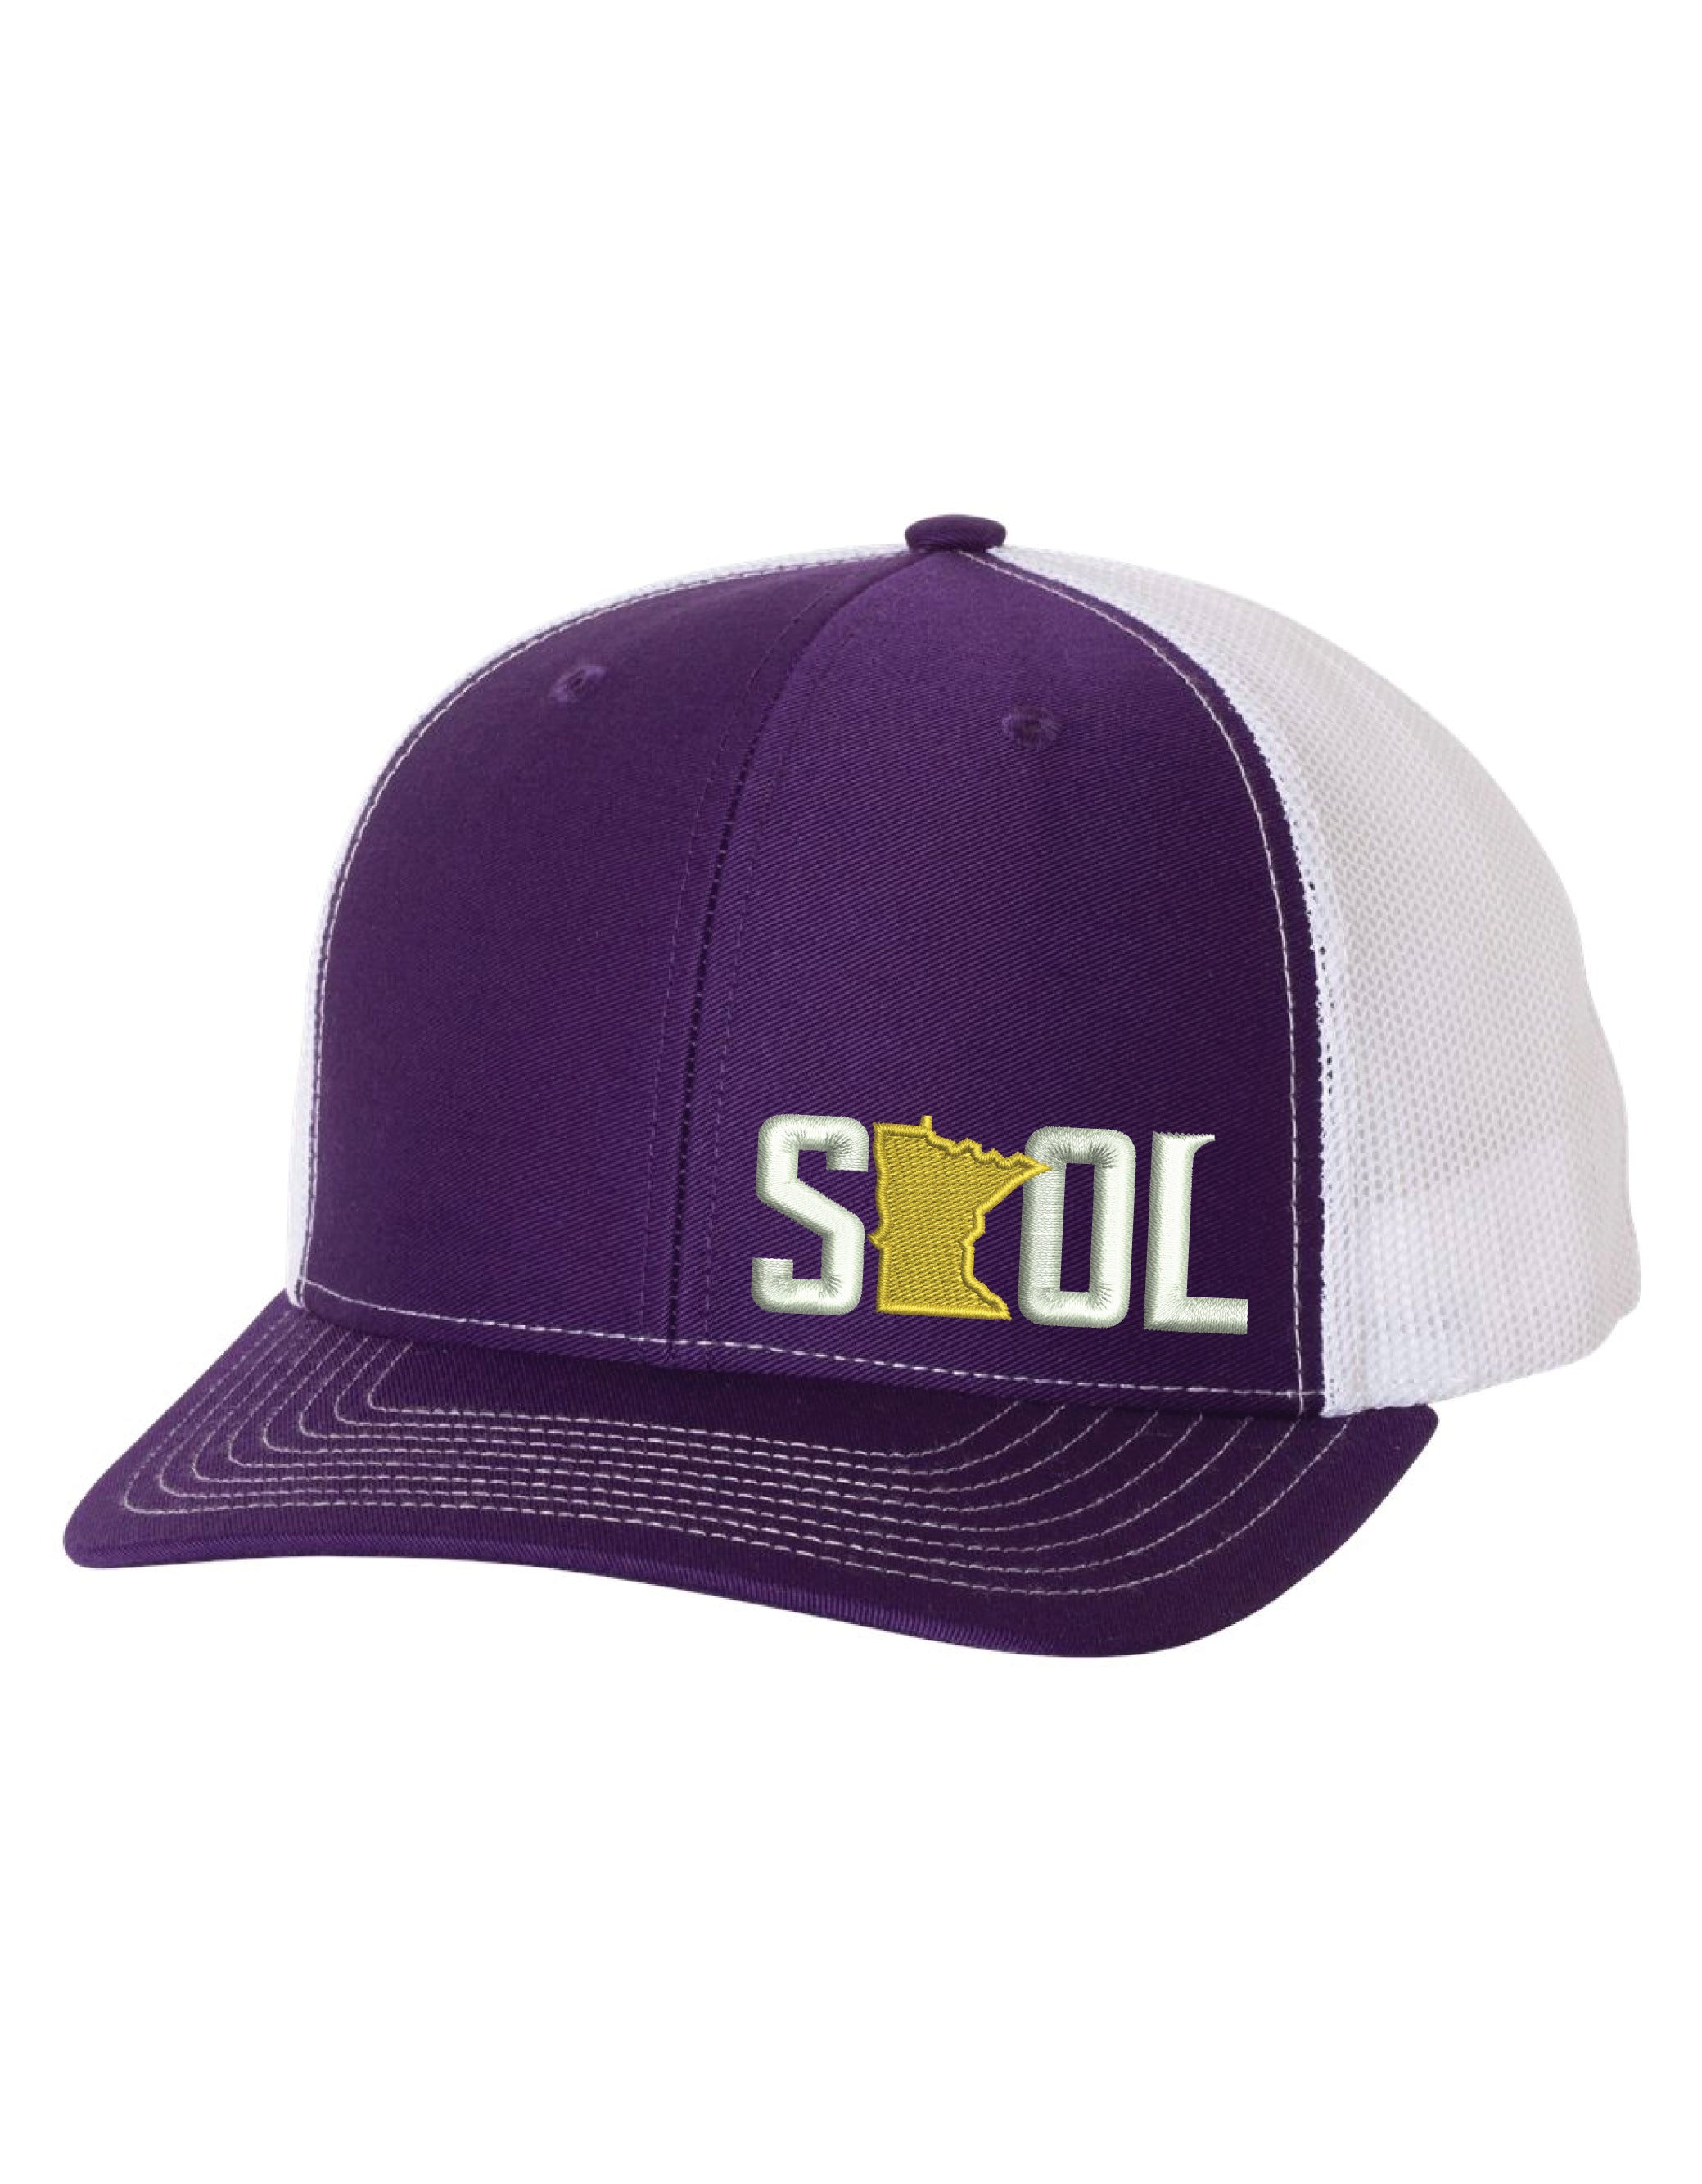 The Teehive SKOL Embroidered Snapback Cap